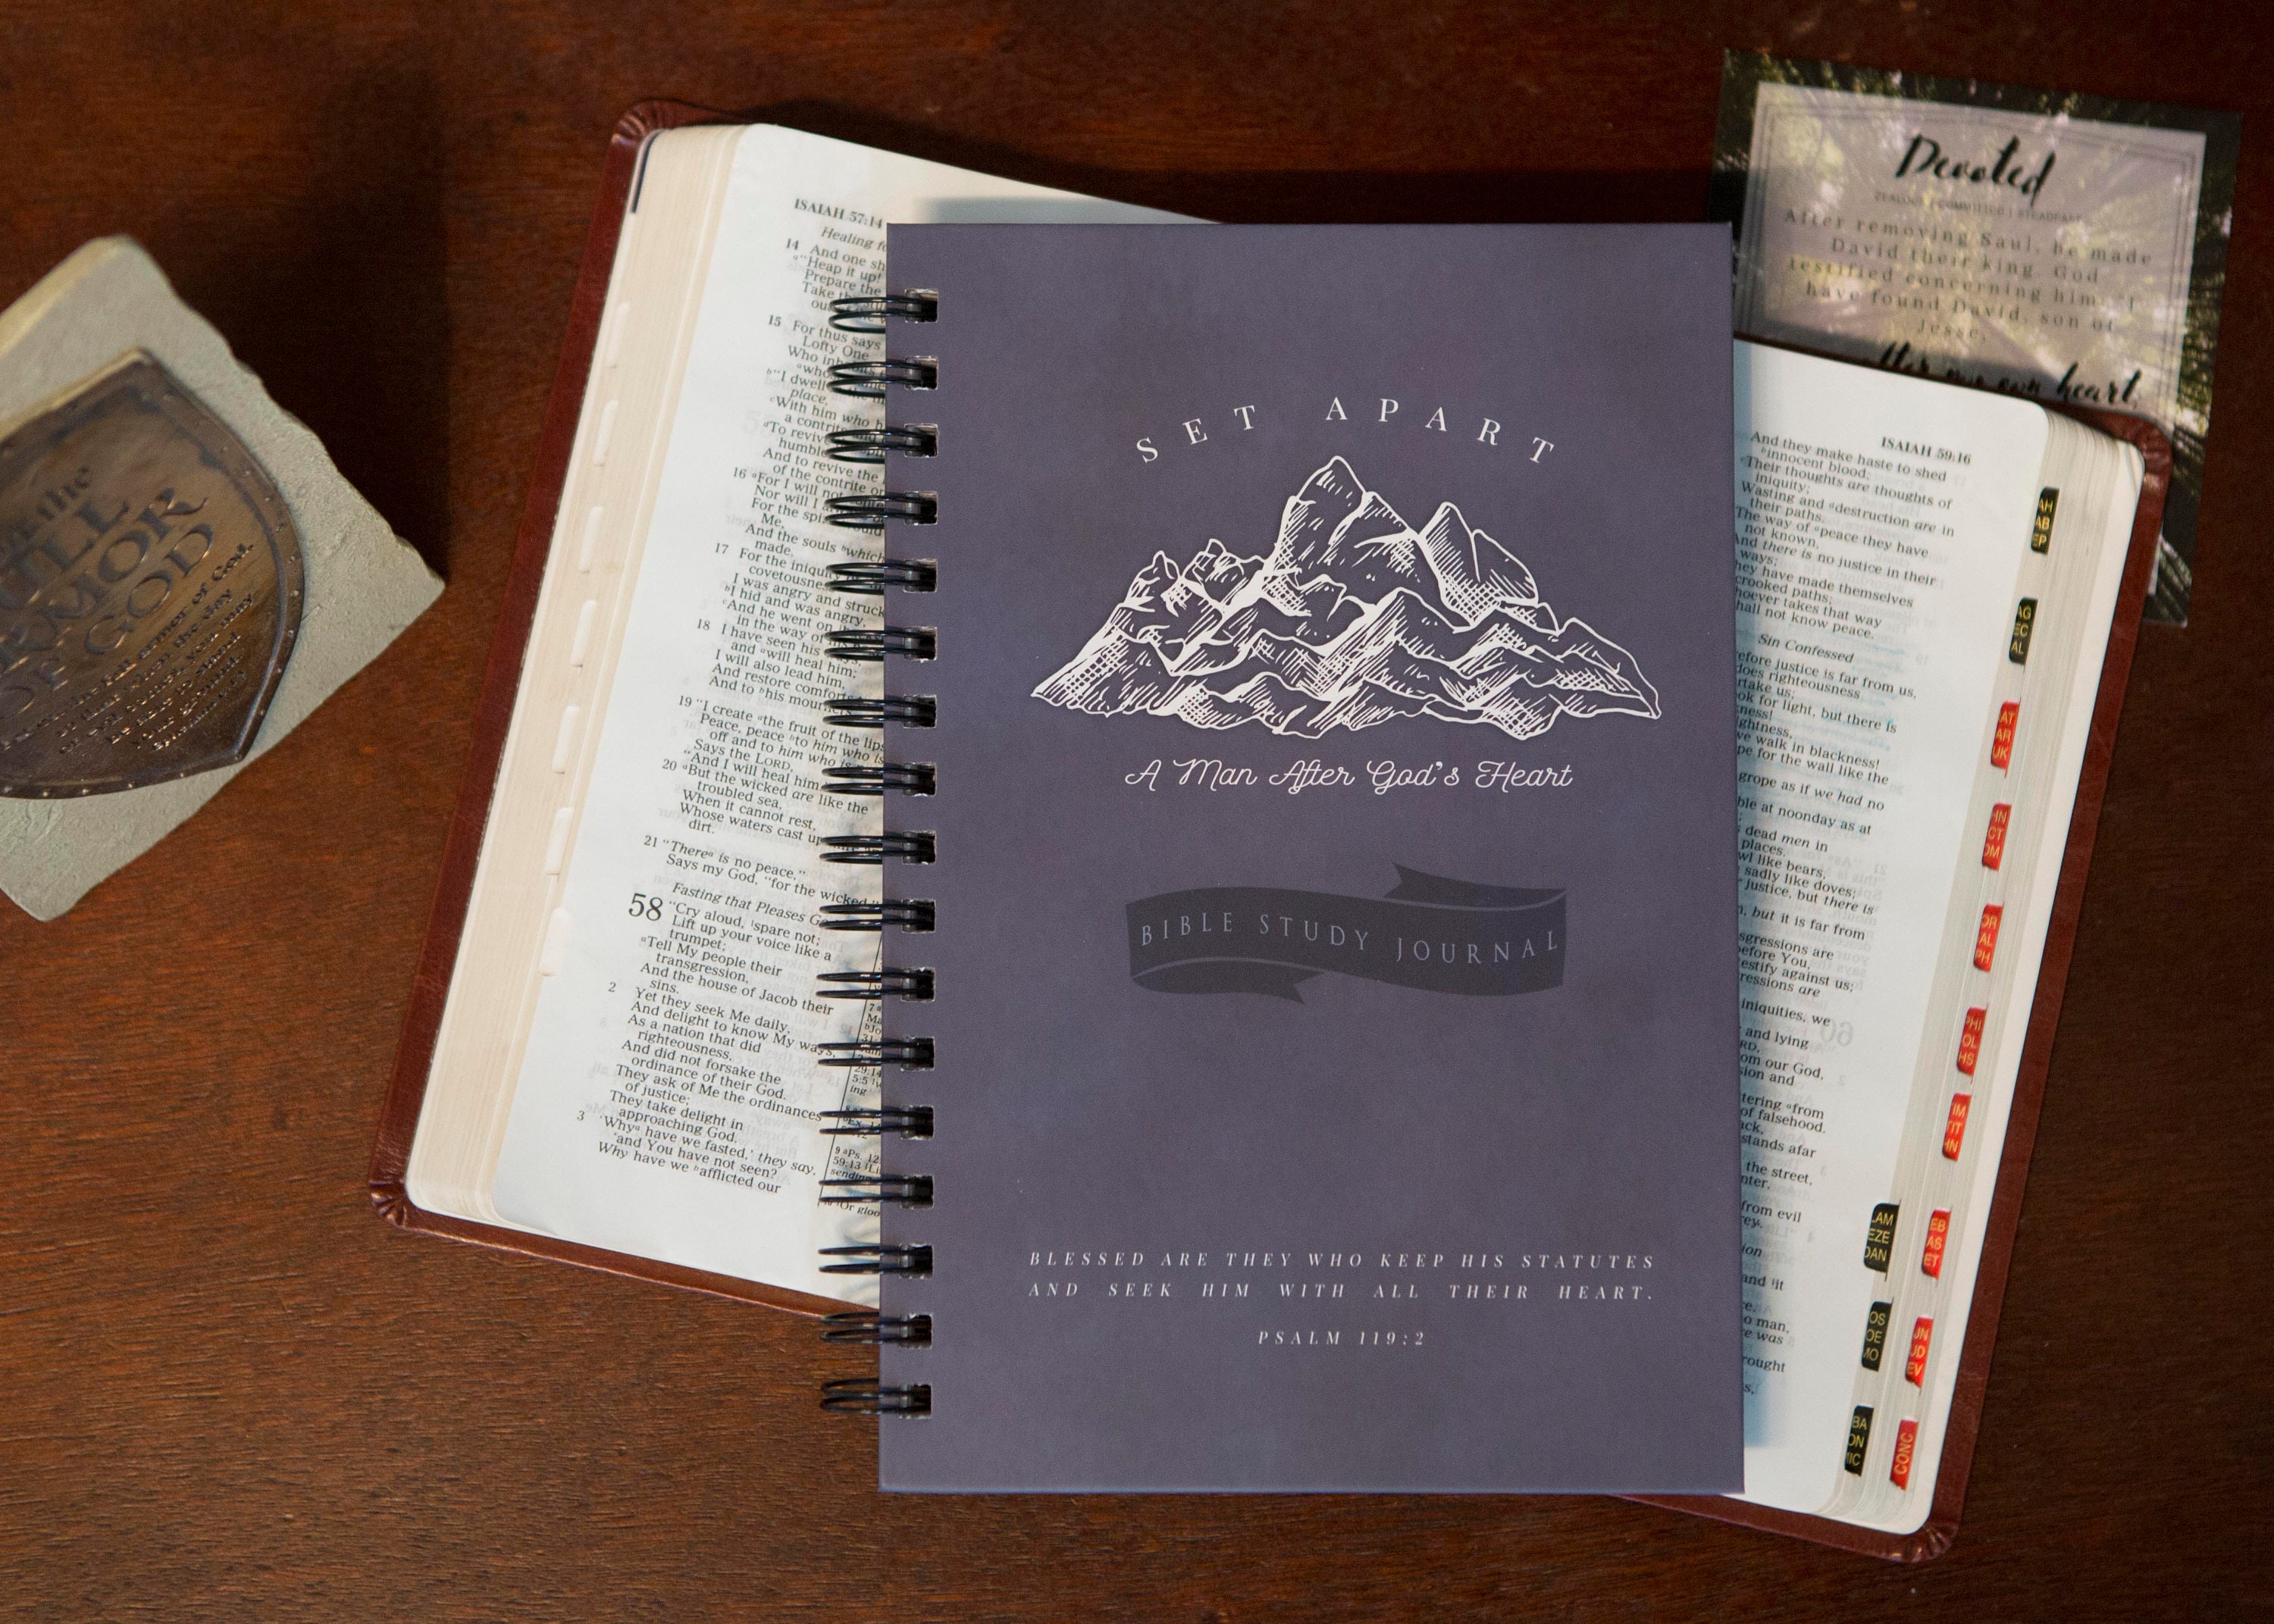 Coffee & Bible Time  Prayer Journals + Christian Products & Community